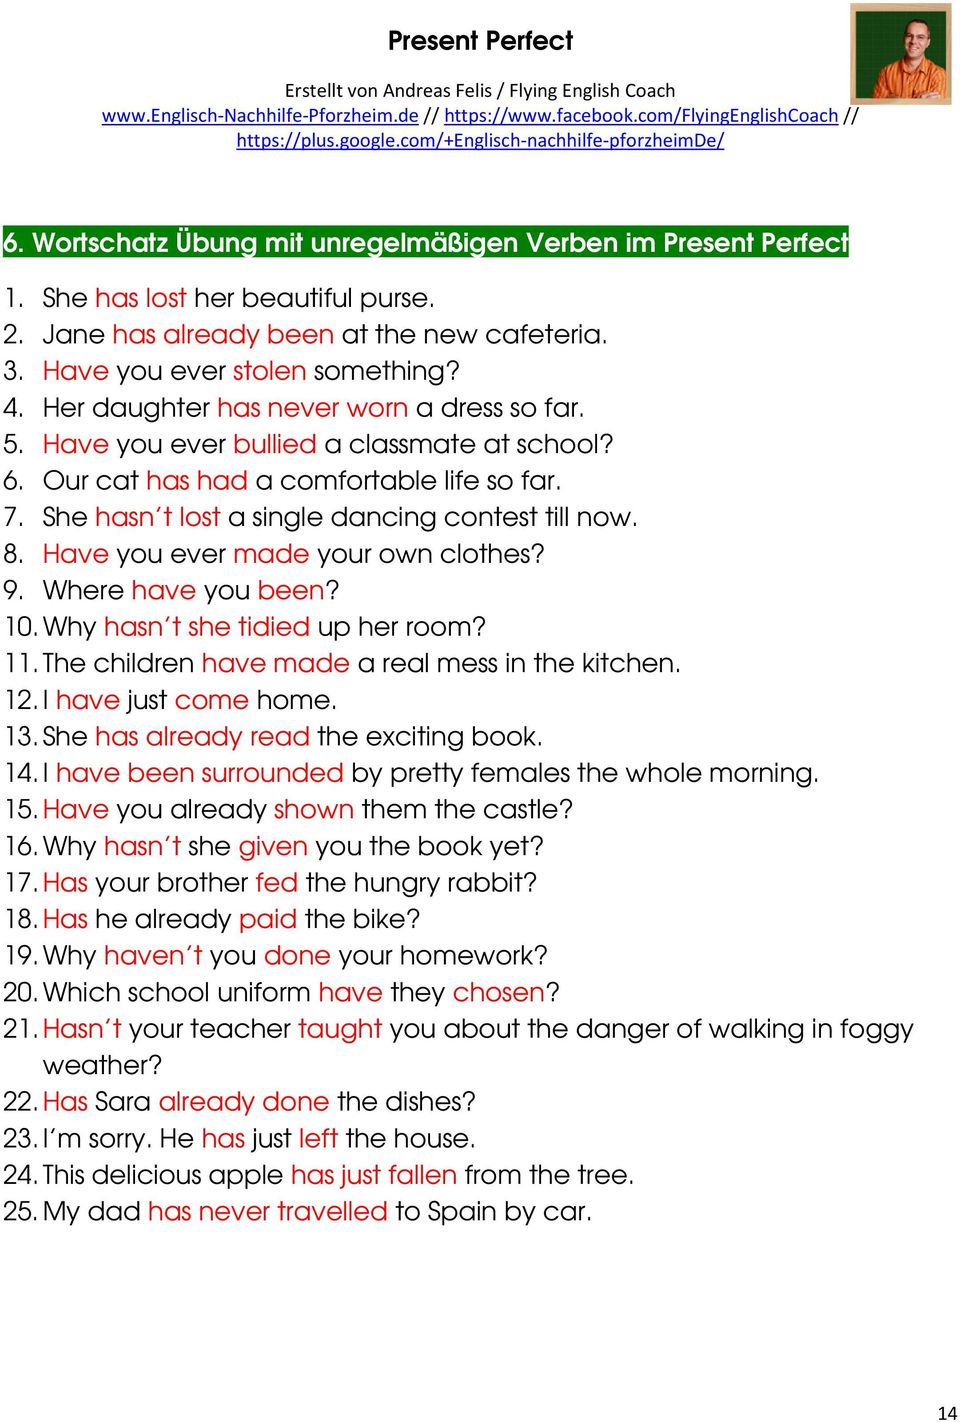 Have you ever made your own clothes? 9. Where have you been? 10. Why hasn t she tidied up her room? 11. The children have made a real mess in the kitchen. 12. I have just come home. 13.